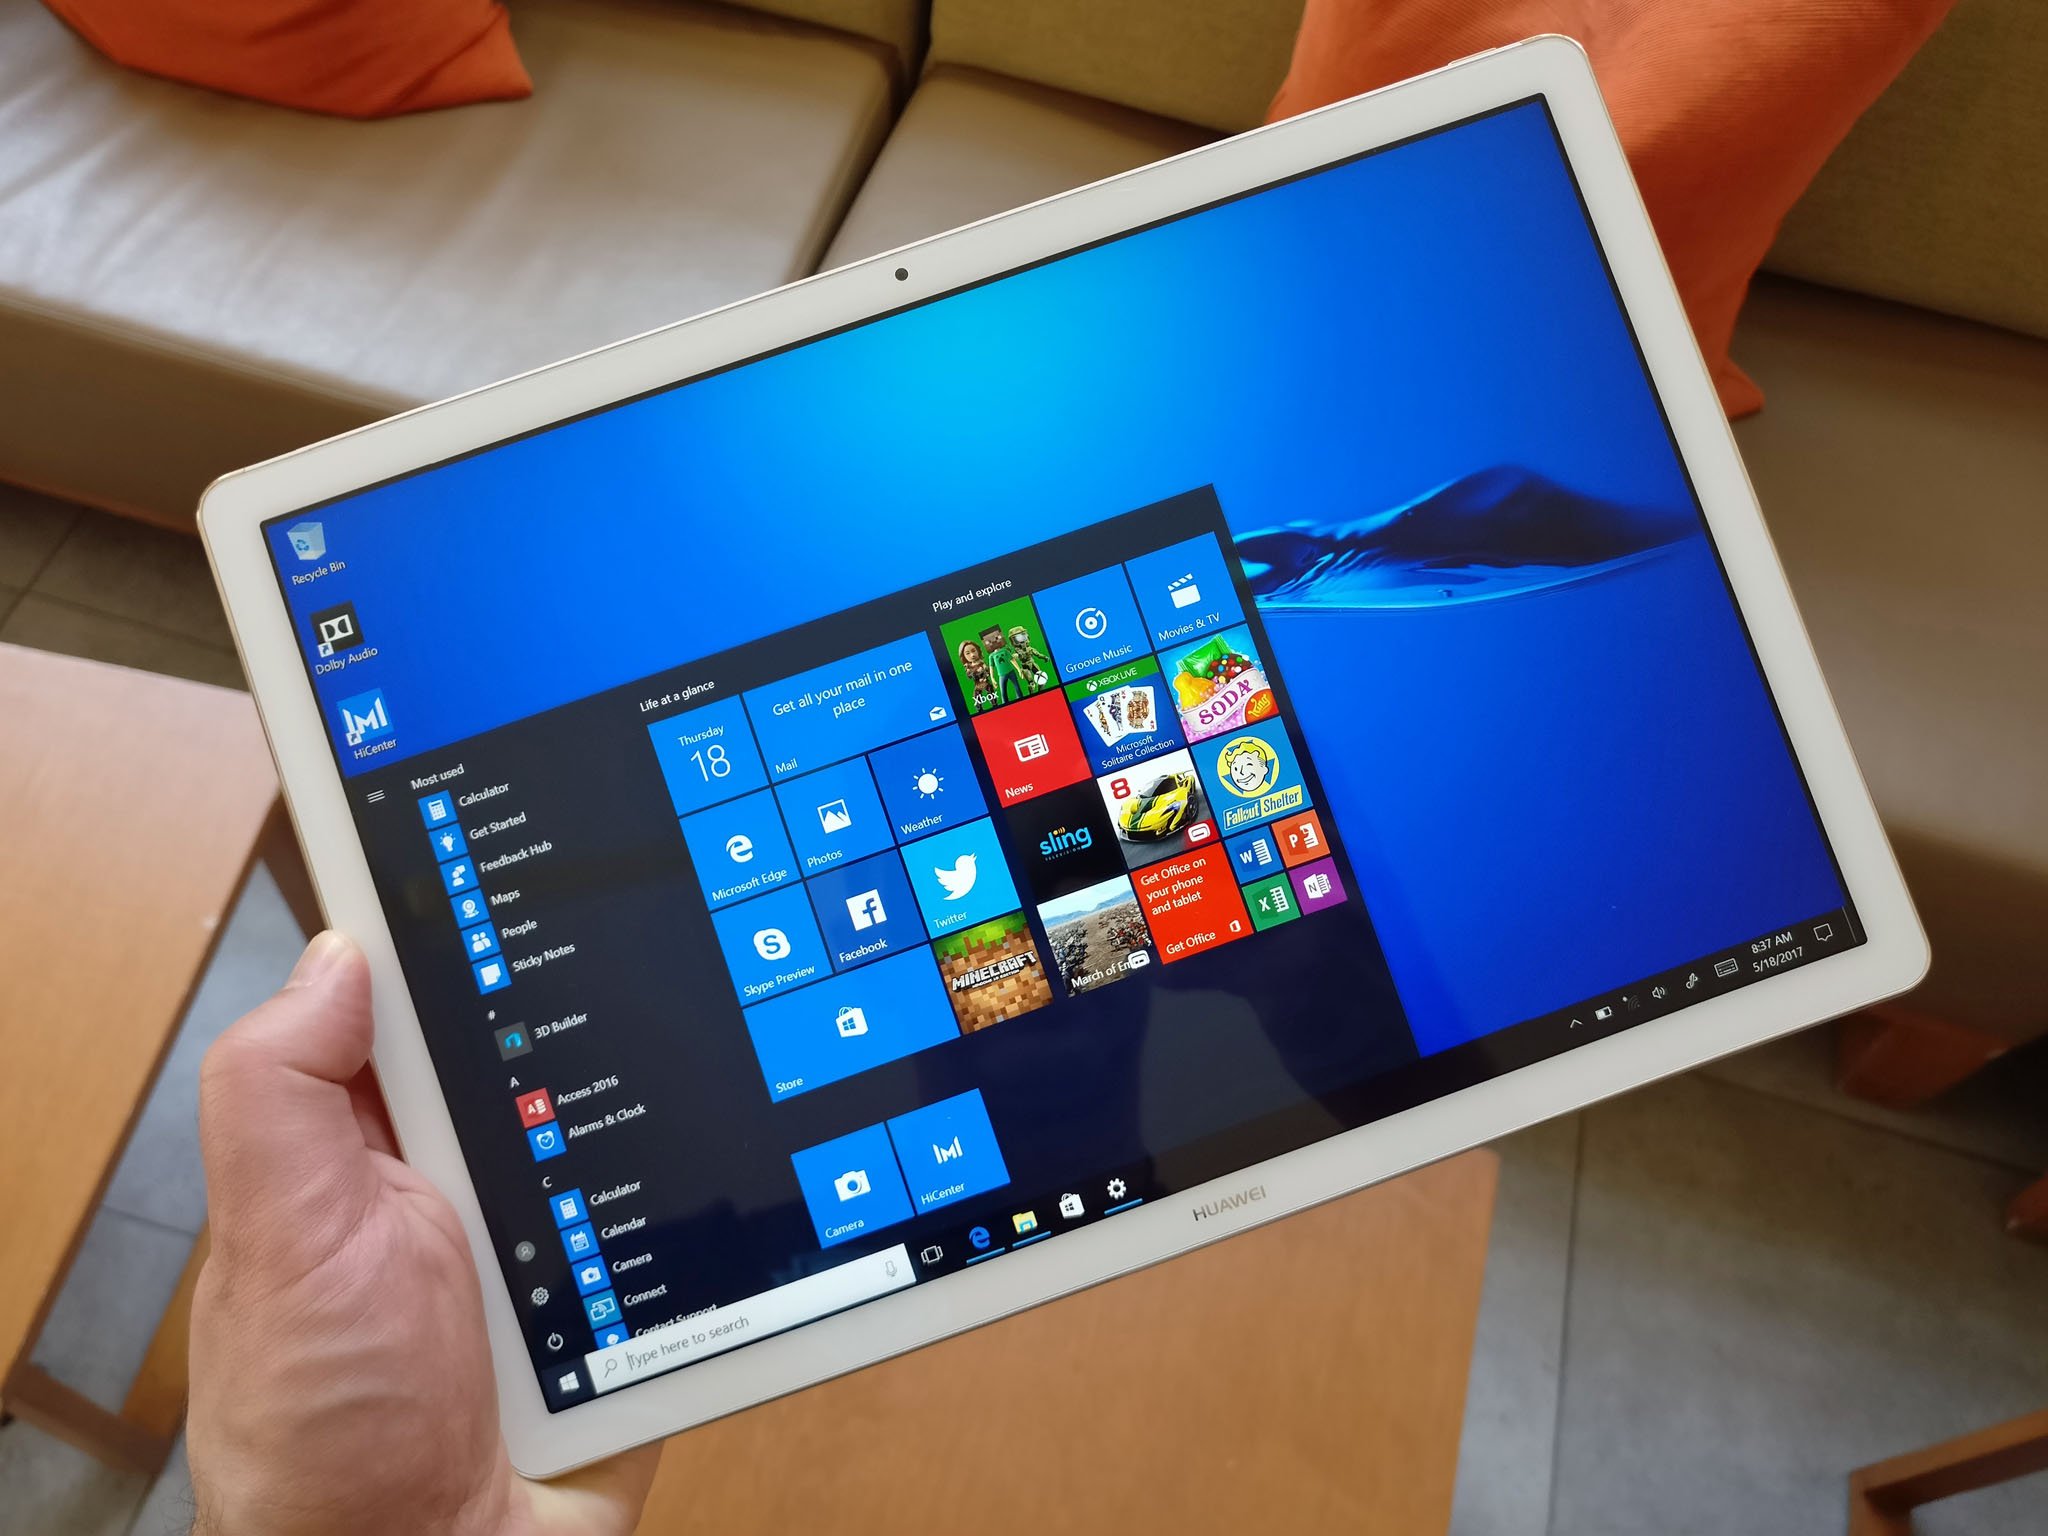 MateBook E is Huawei's refreshed 2-in-1 Windows 10 tablet for 2017